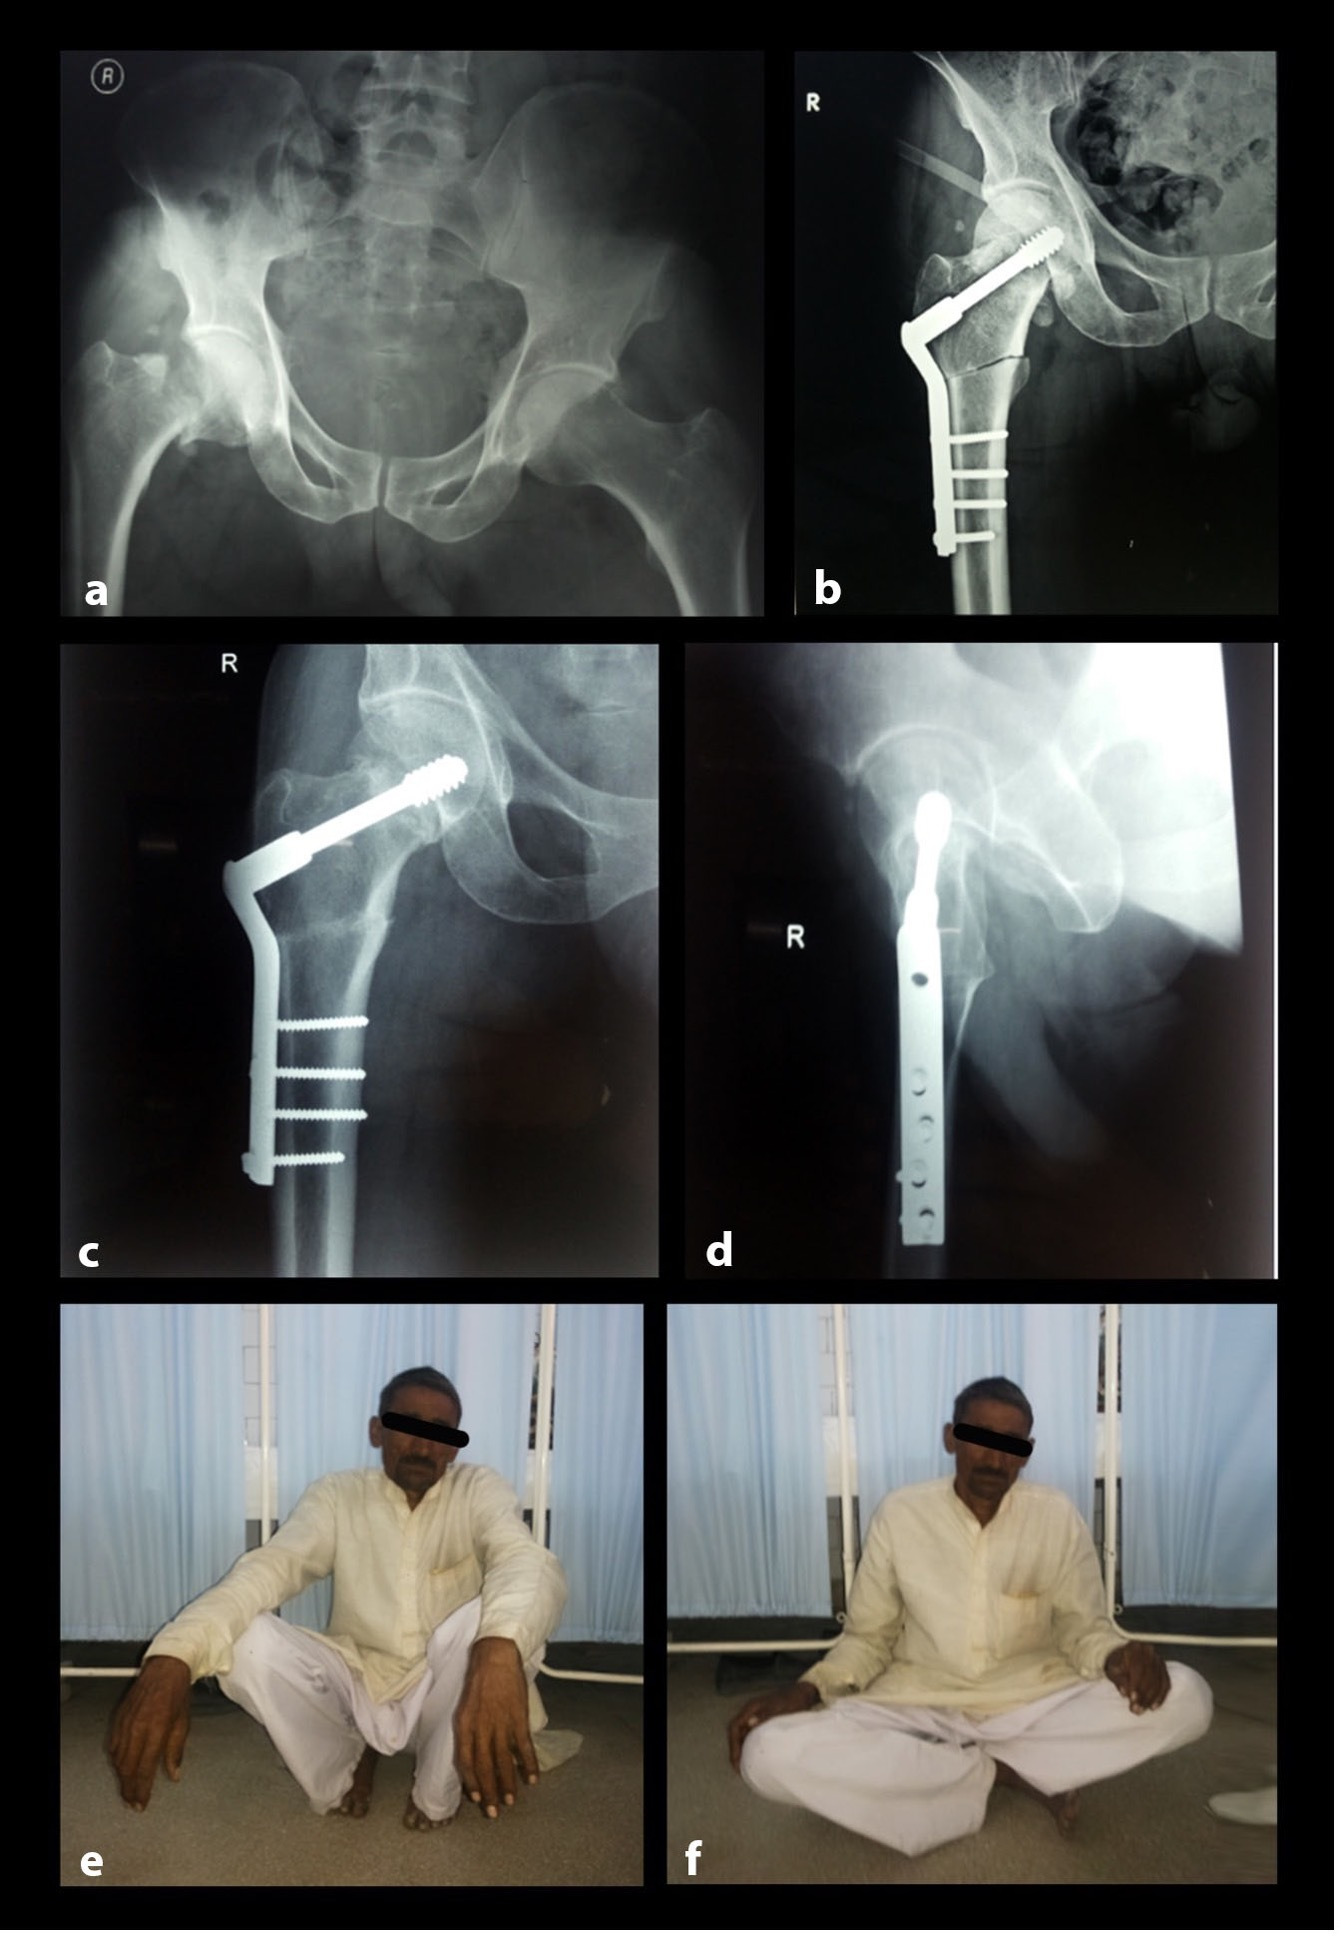 Fig. 4 
            Clinical case of the valgus hip osteotomy and operative fixation technique. a) Preoperative pelvic radiograph showing right Garden 3 fracture neck of femur. b) Postoperative radiograph showing intertrochanteric osteotomy and fracture fixation using a double-angled dynamic hip screw. c) and d) Three-year radiograph showing healing of fracture and osteotomy union. No osteonecrosis is visualized. e) and f) Patient capabilities at three-year follow-up (full squatting and cross-legged sitting).
          